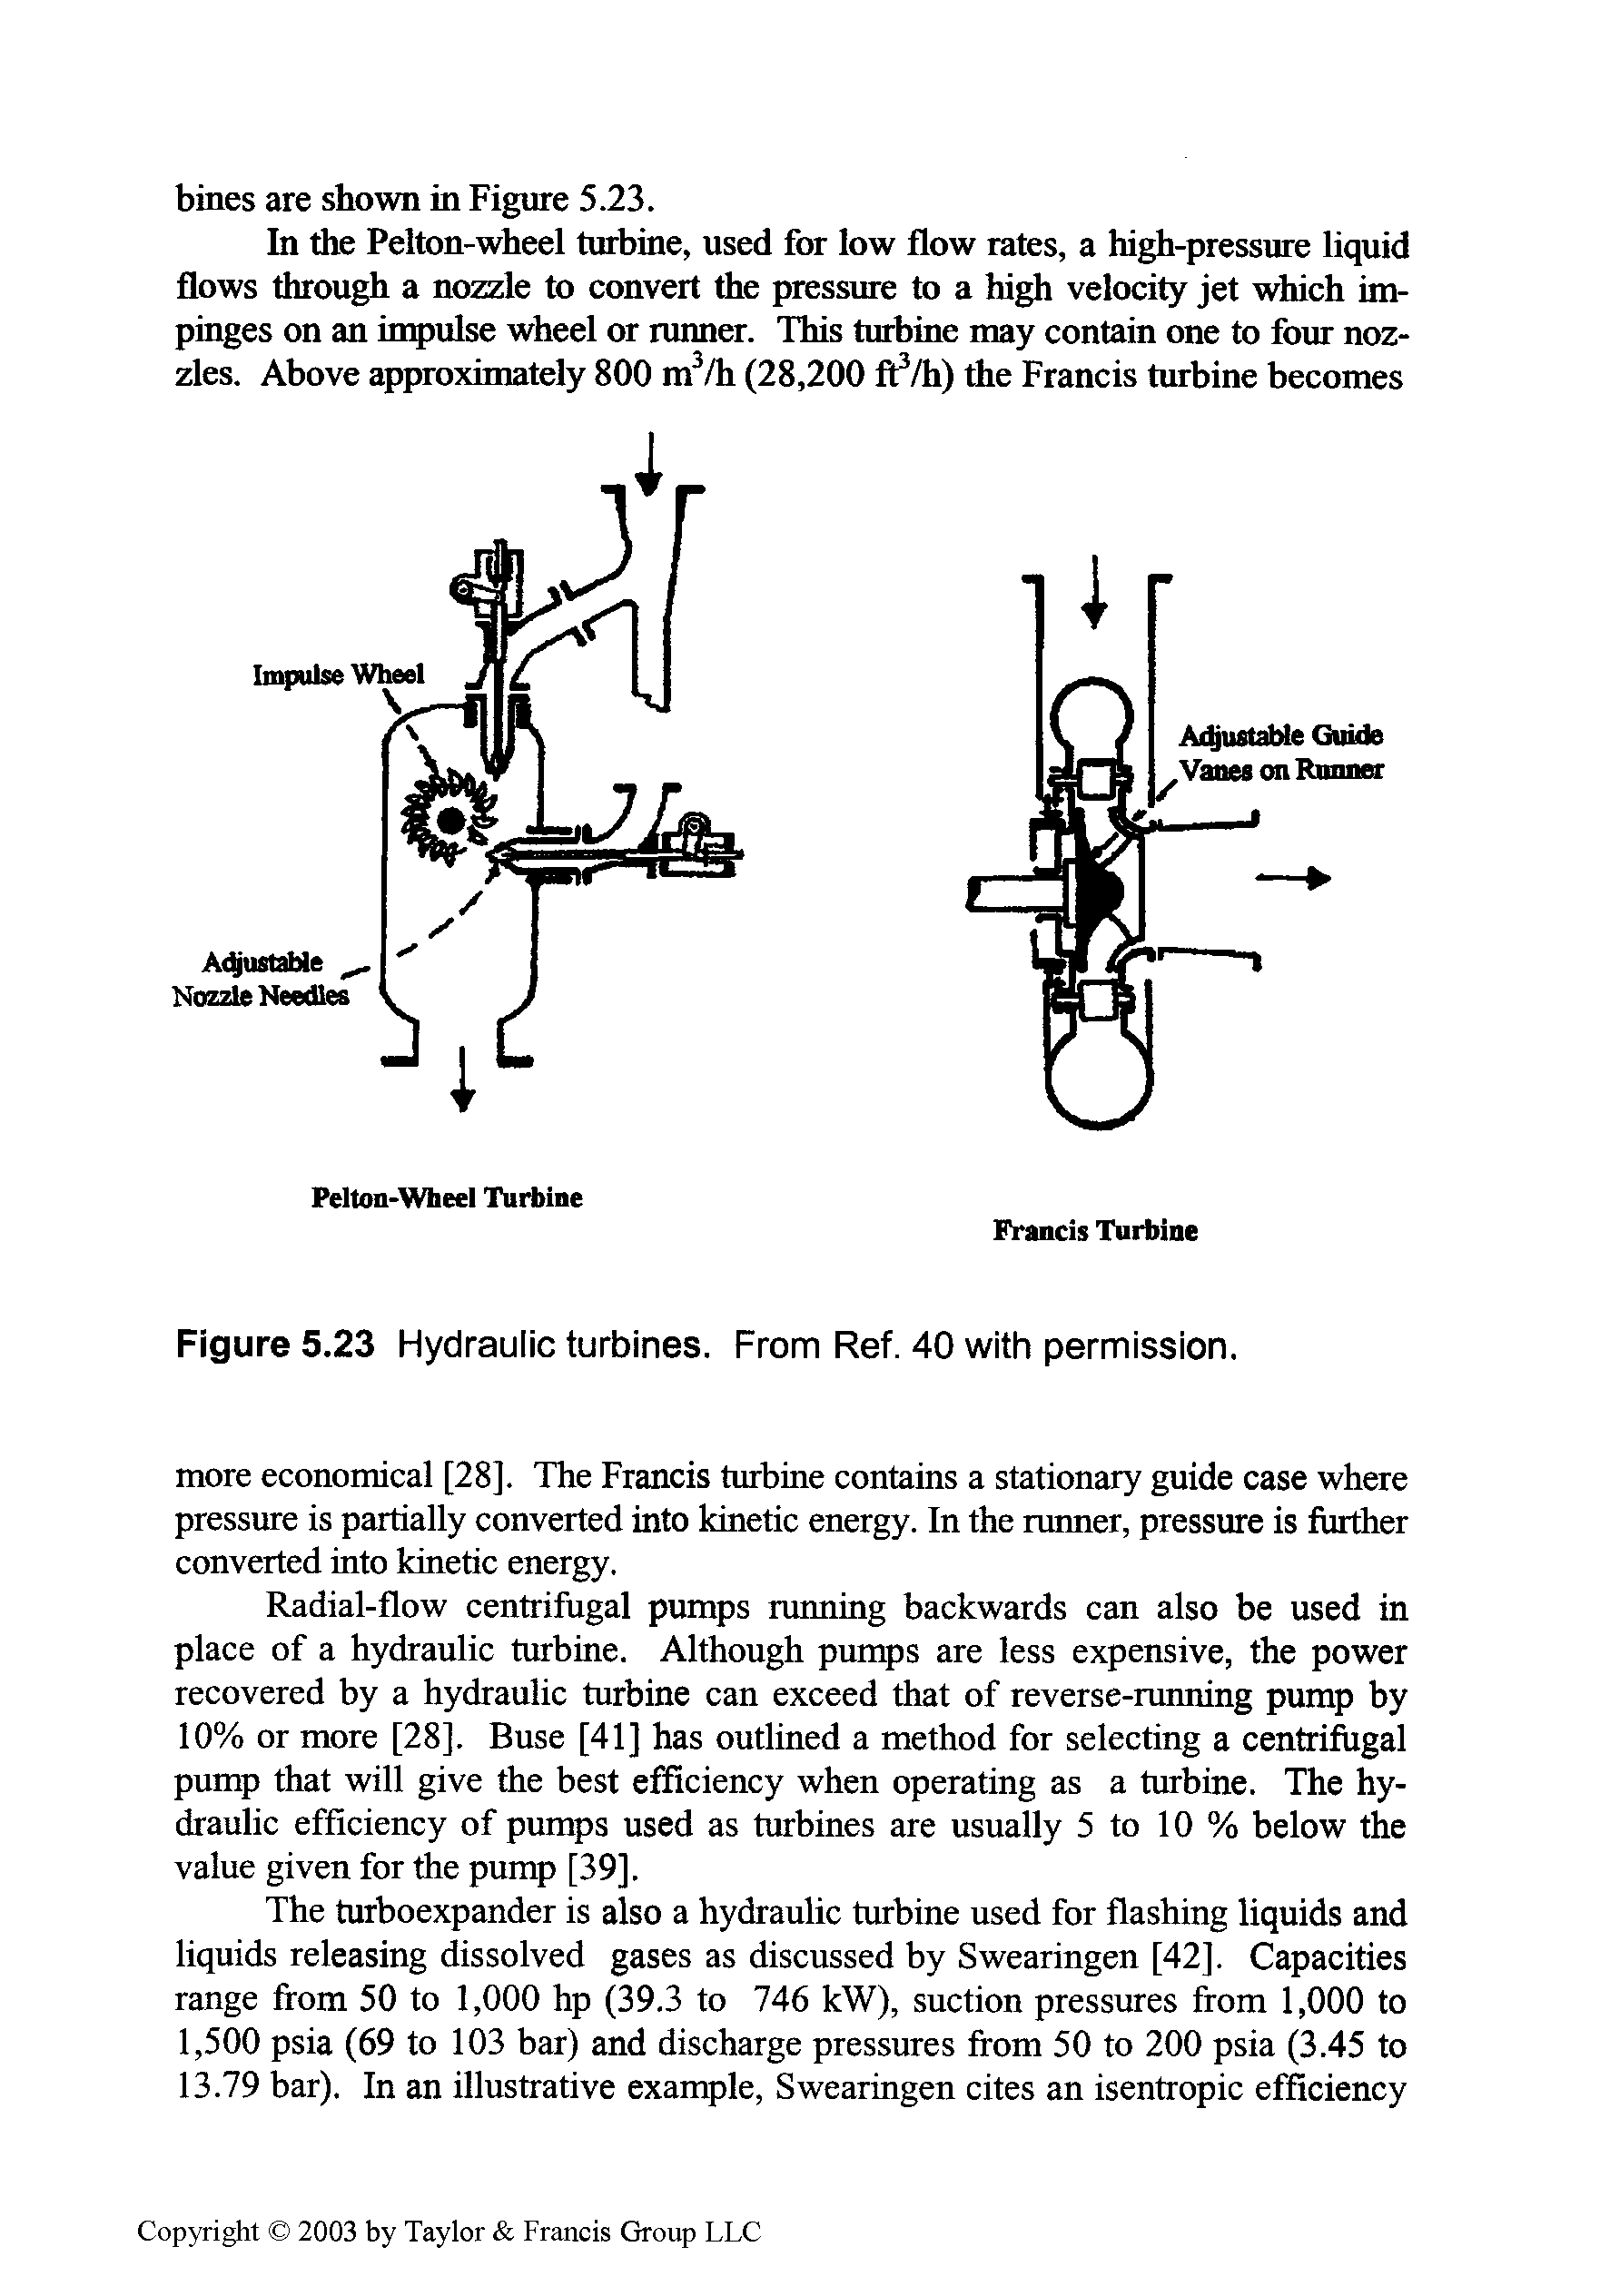 Figure 5.23 Hydraulic turbines. From Ref. 40 with permission.